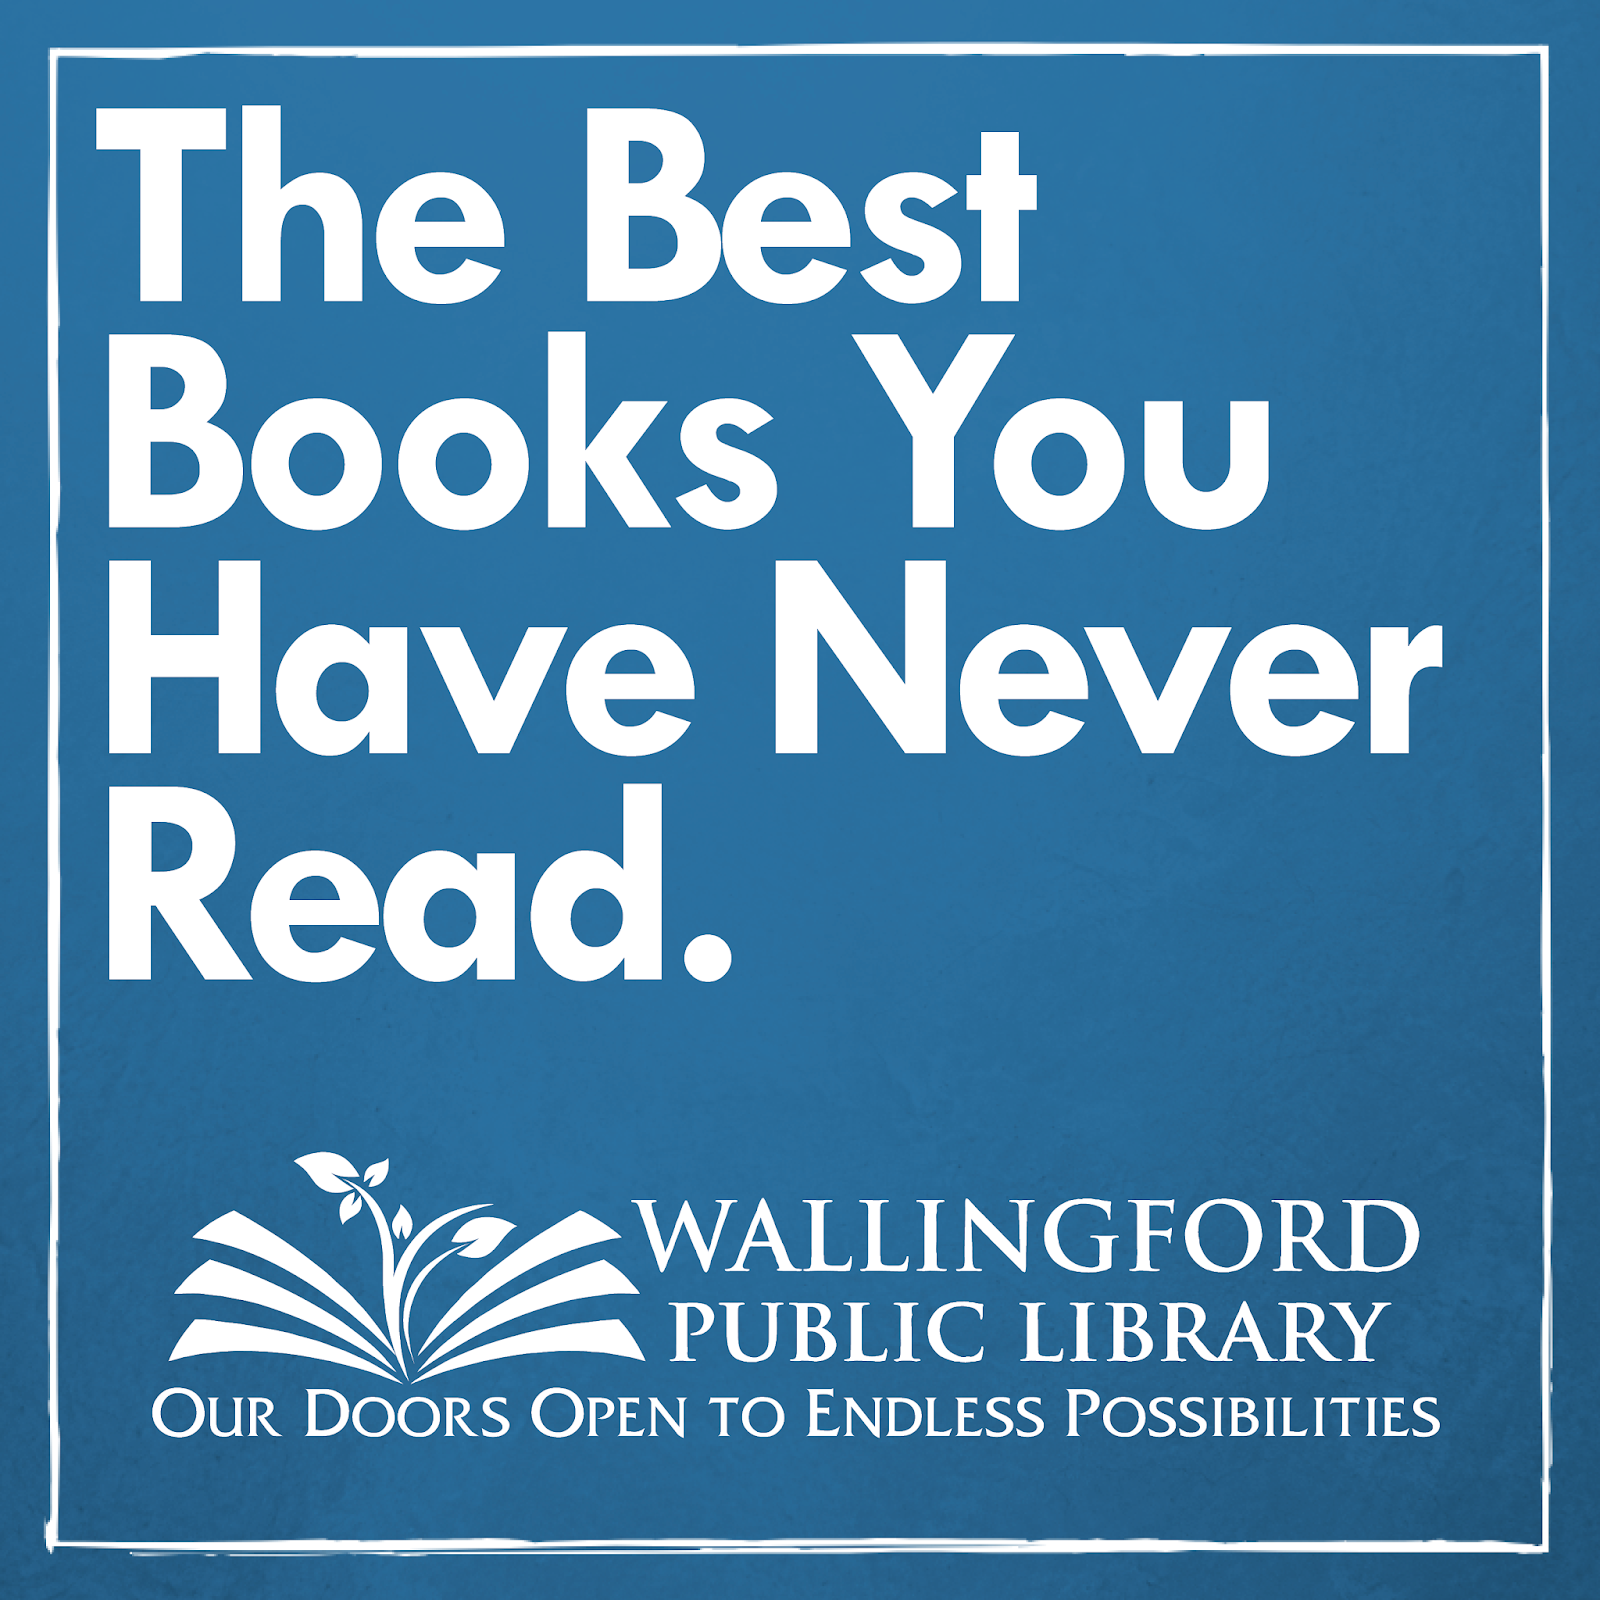 The Best Books You Have Never Read